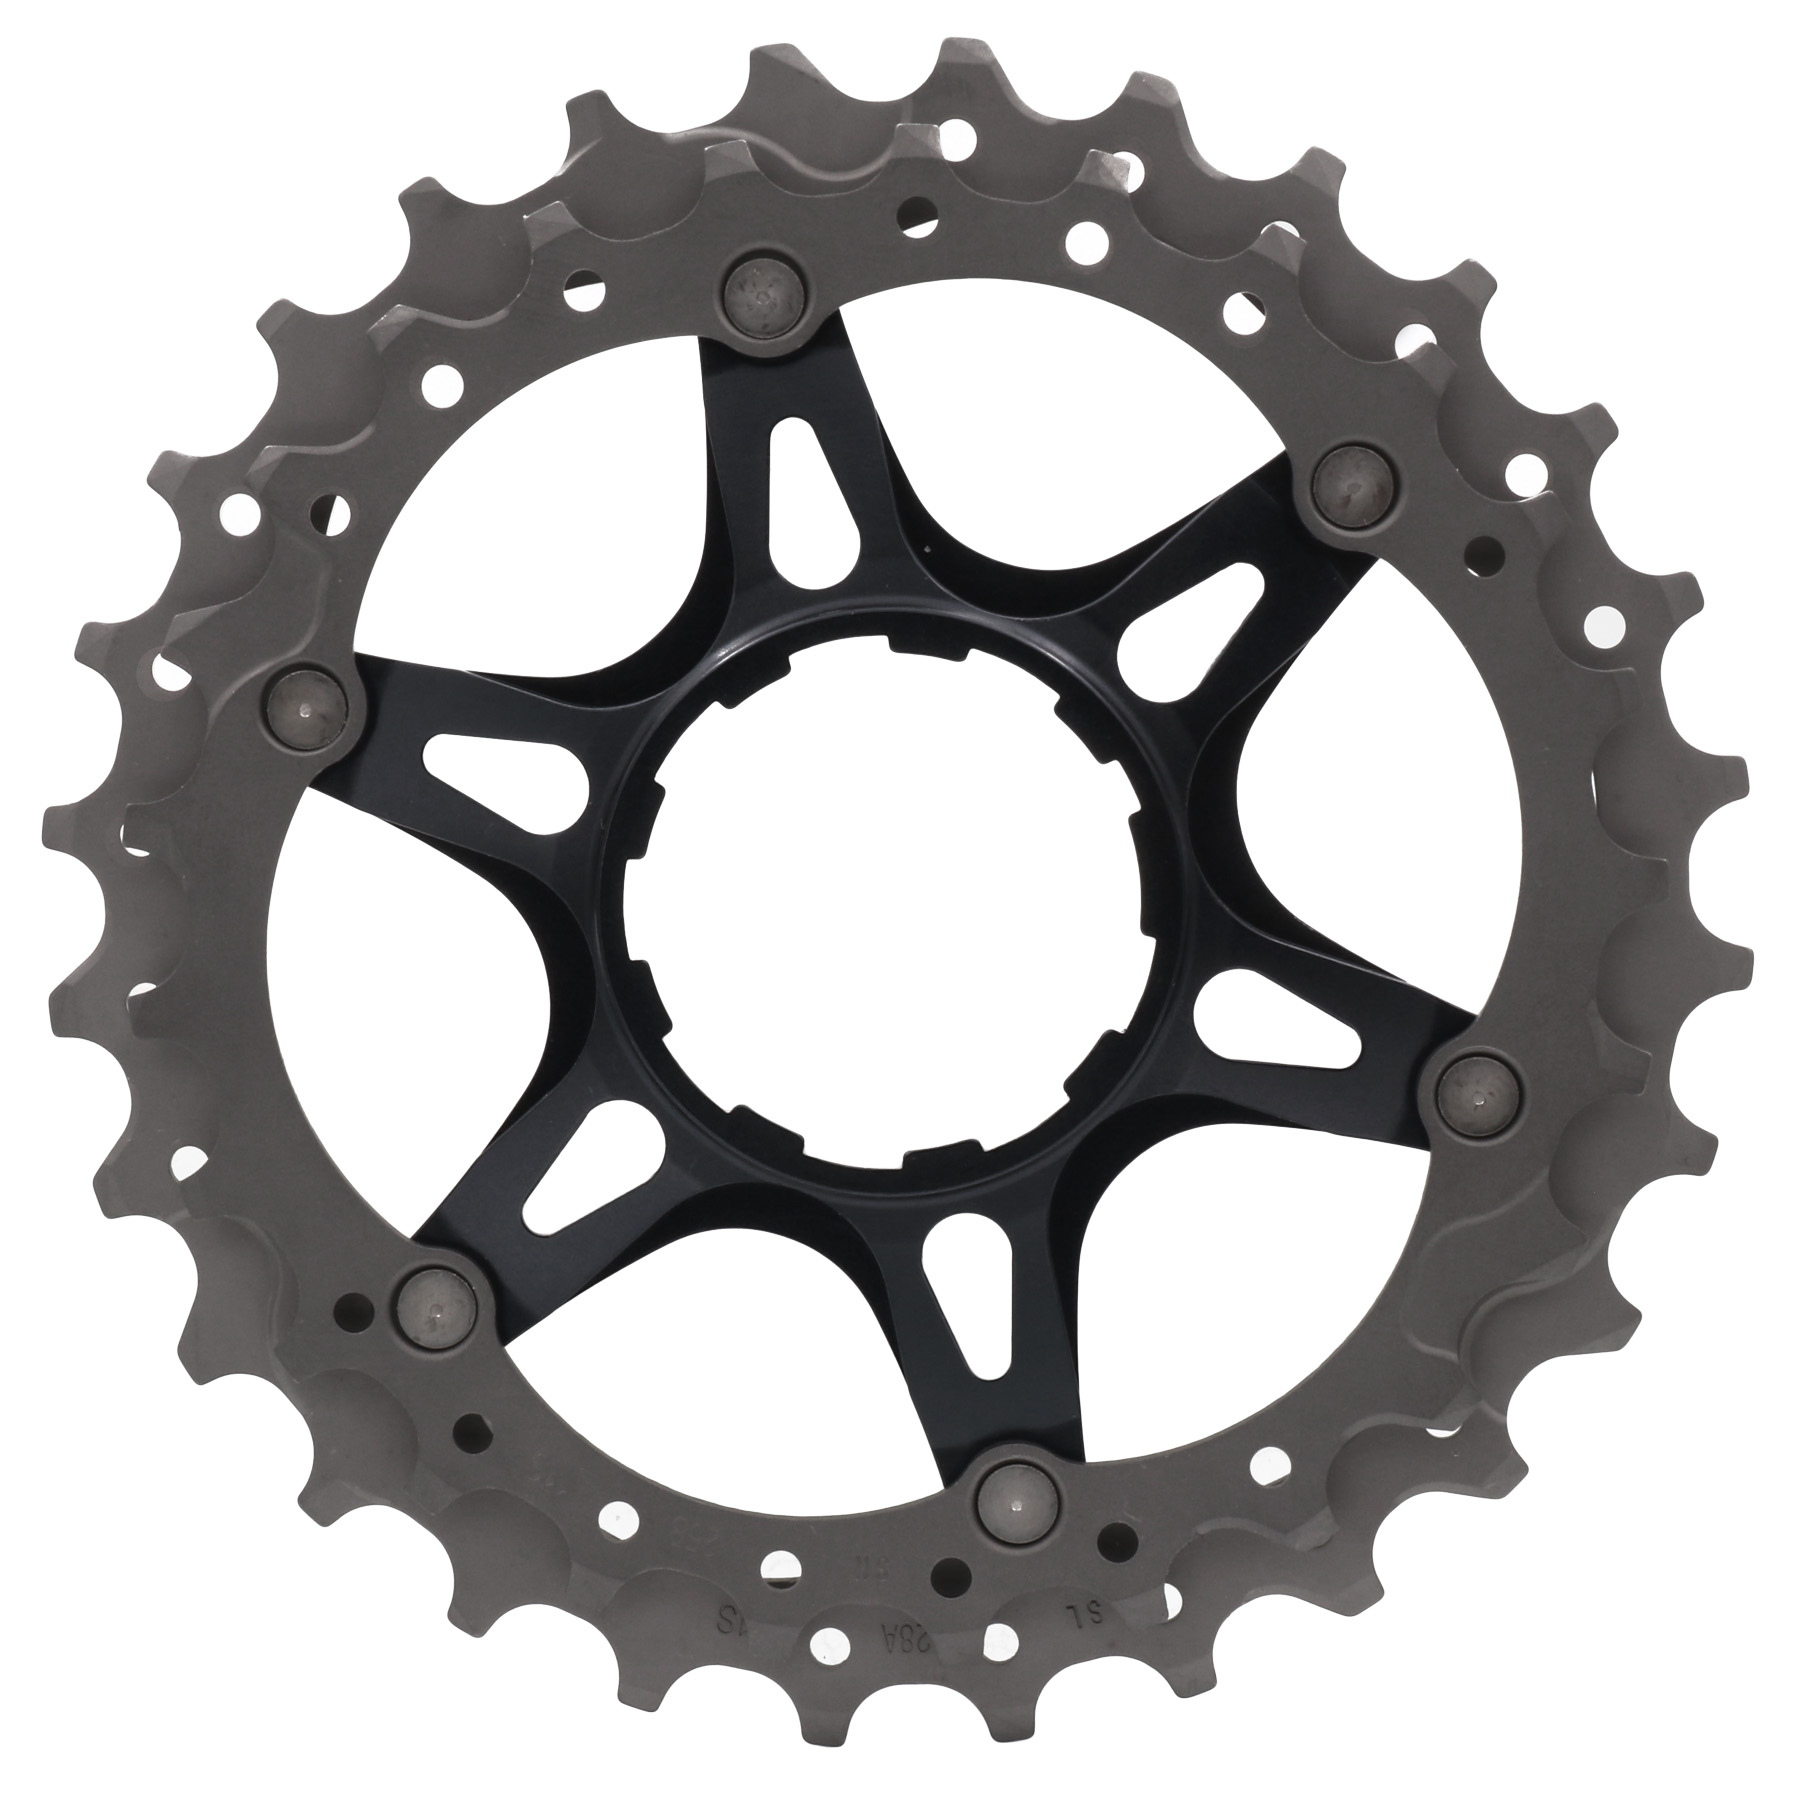 Picture of Shimano Sprocket for Dura Ace 11-Speed Cassette - 25-28 T for 11-28 (Y1VT98040) - CS-R9100 / CS-9000